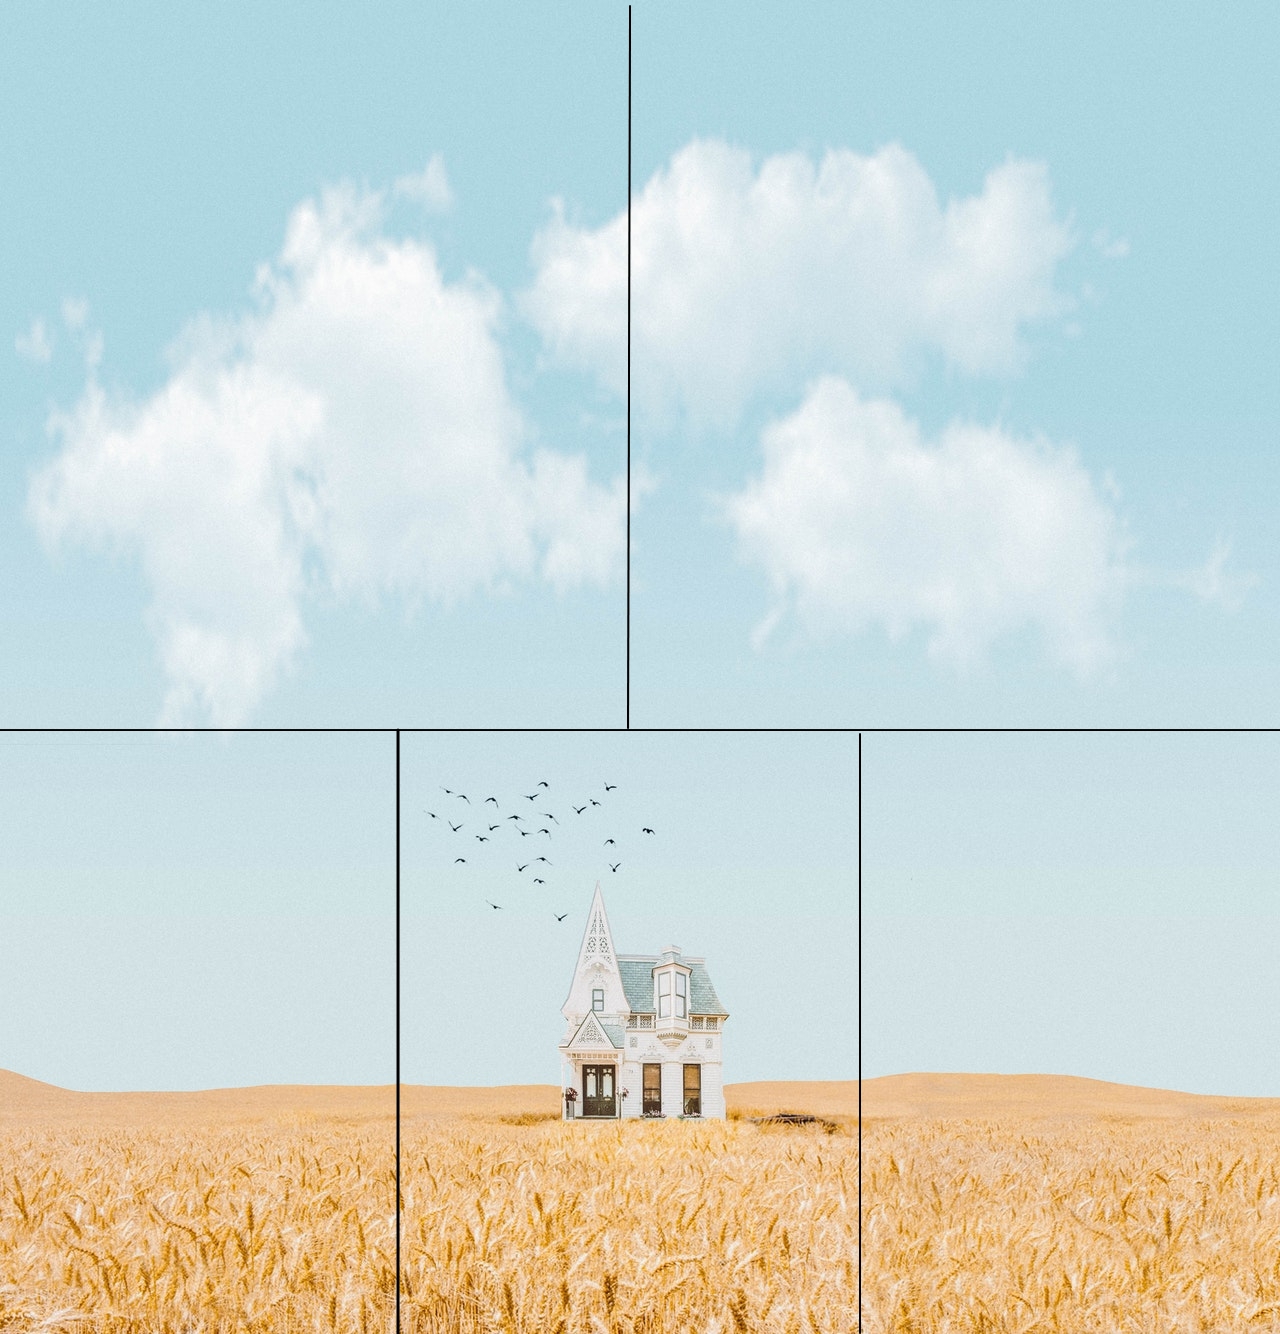 house-in-the-middle-of-crop-field-3330118_-_crop_lines.jpg